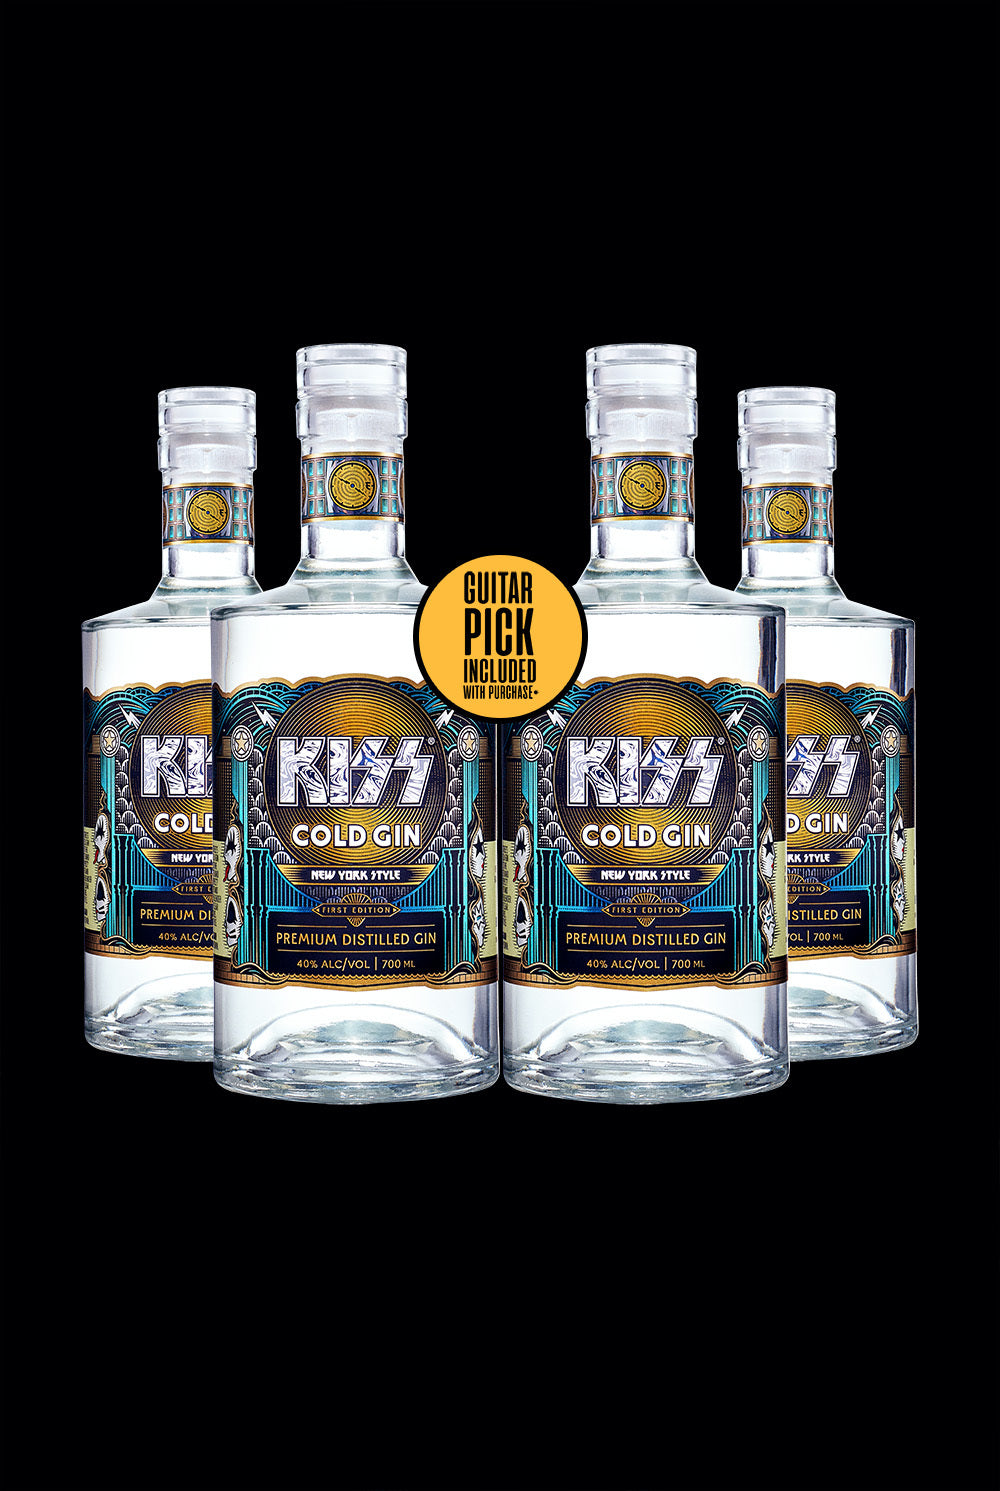 KISS Premium COLD GIN BUNDLE – Drink It Up by KISS